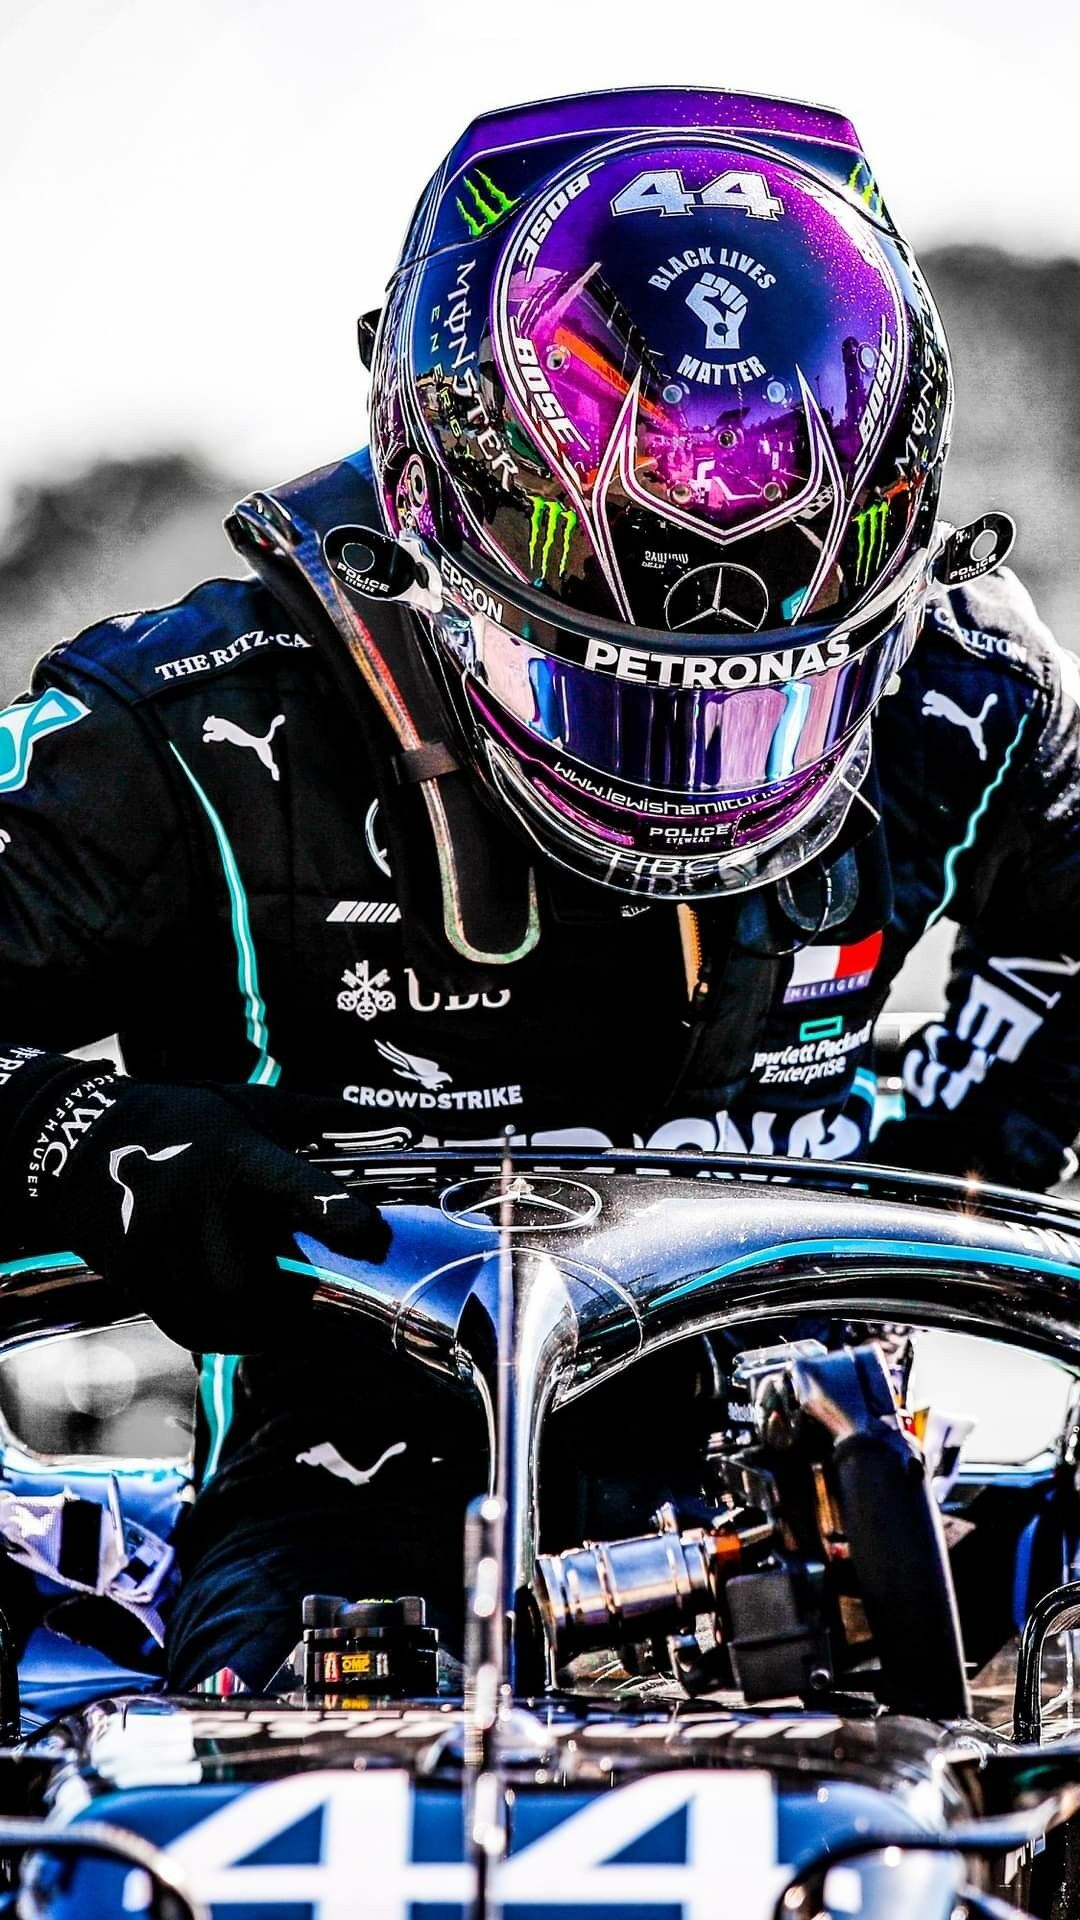 Lewis Hamilton: A British Formula One racing driver, holding the record for the number of pole start positions (103). 1080x1920 Full HD Background.